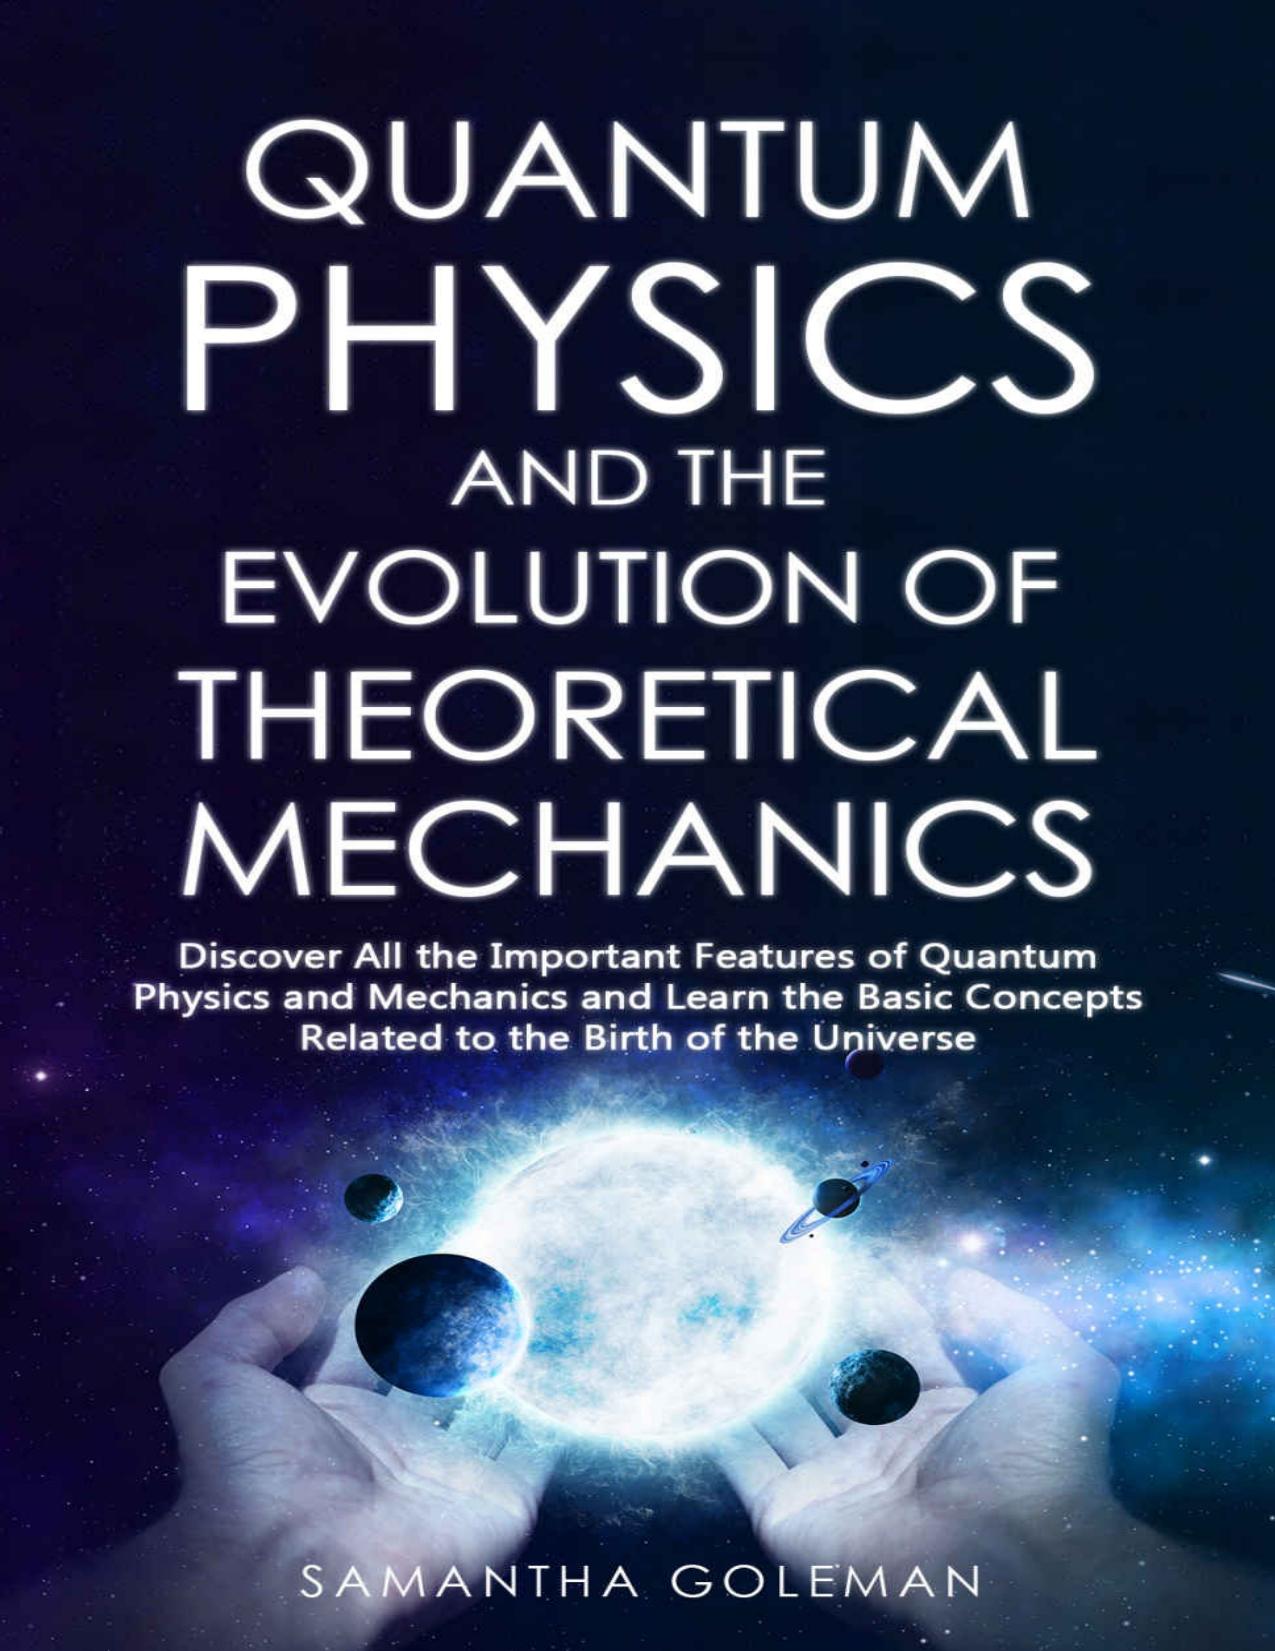 Quantum Physics and the Evolution of Theoretical Mechanics: Discover All the Important Features of Quantum Physics and Mechanics and Learn the Basic Concepts Related to the Birth of the Universe by Samantha Goleman